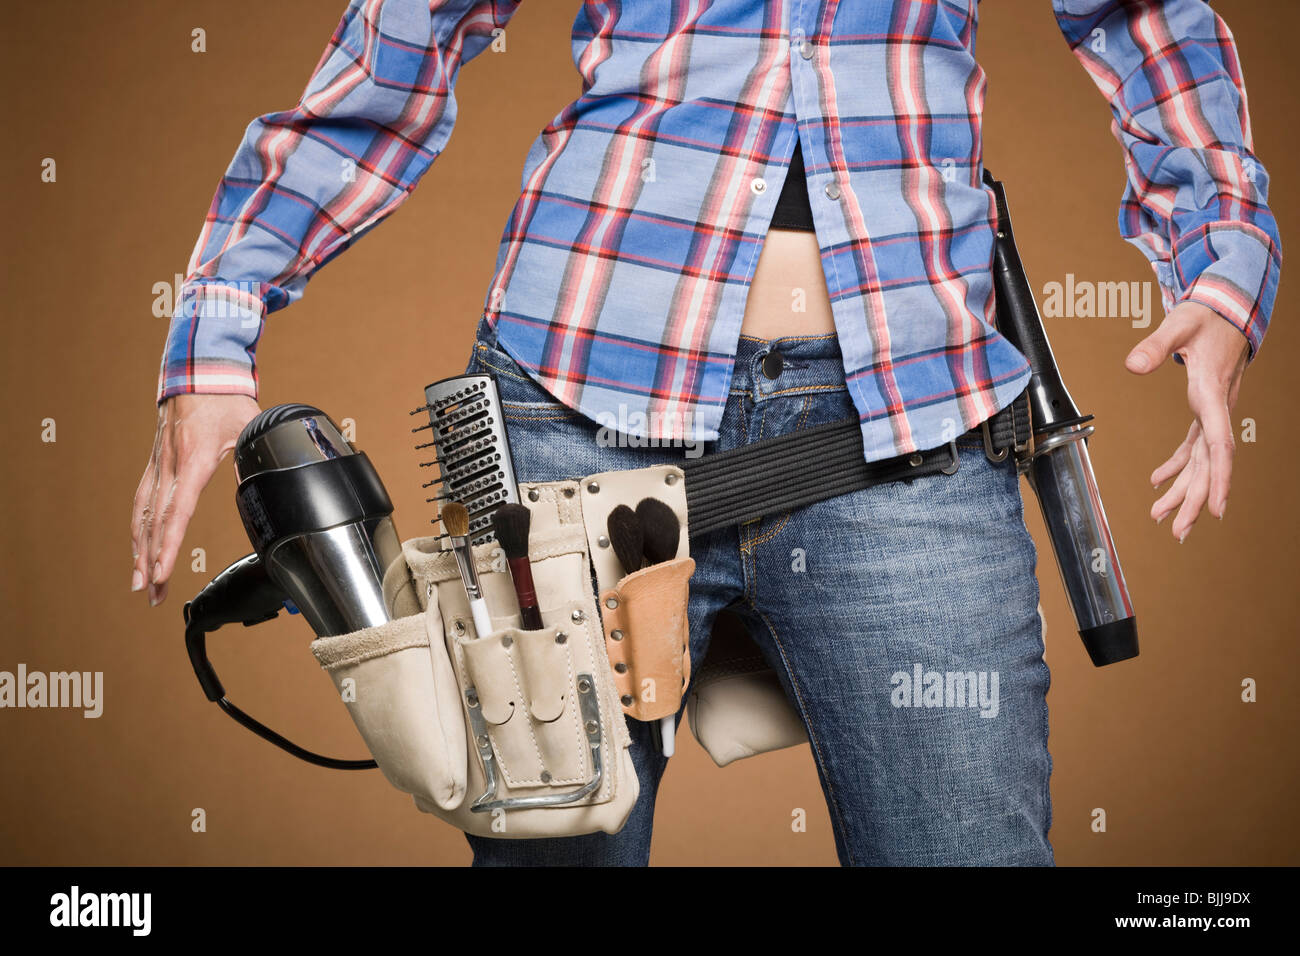 Mid section view of hairdresser with tool belt Stock Photo